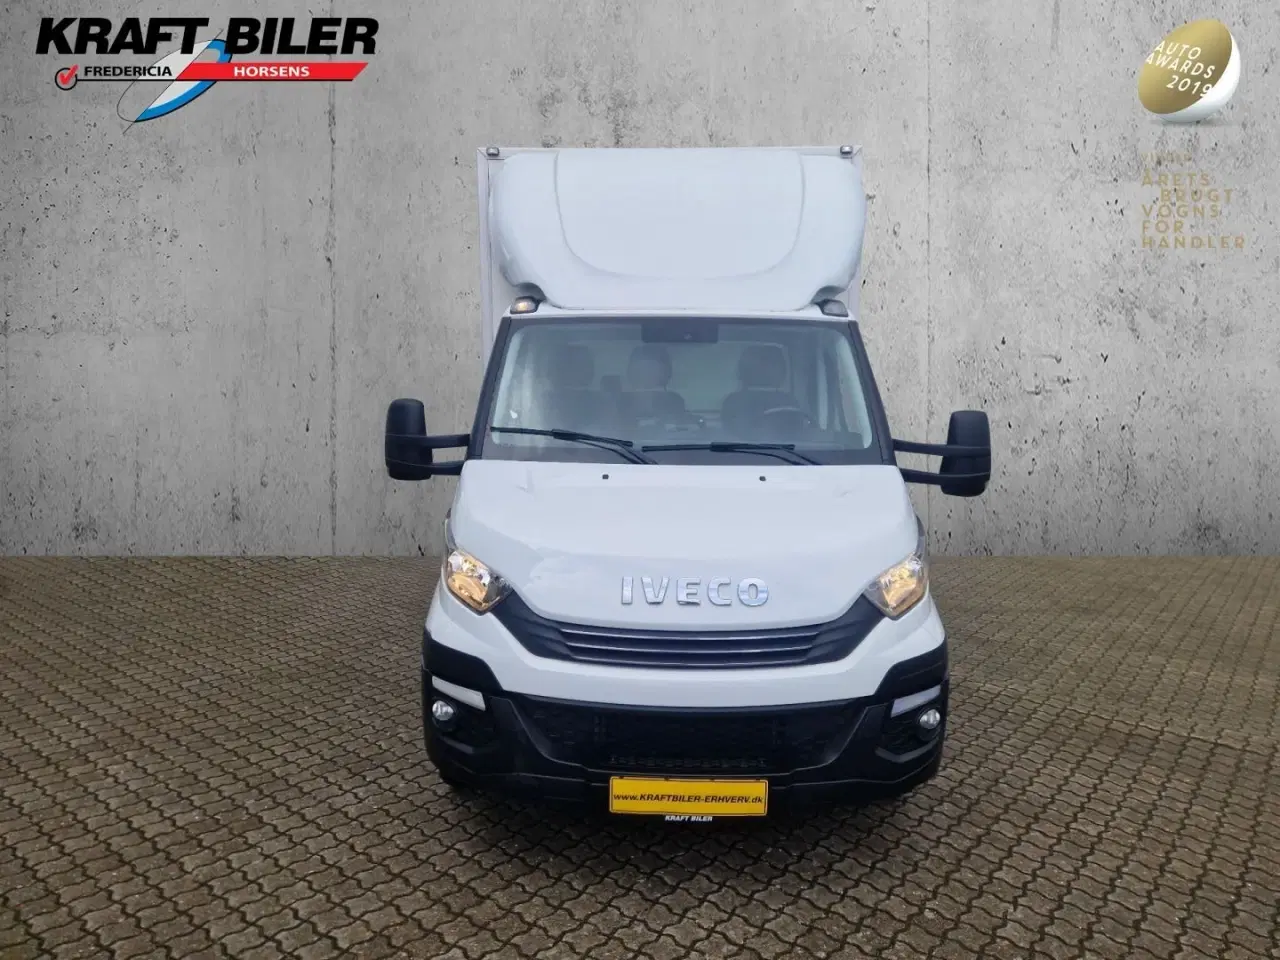 Billede 8 - Iveco Daily 3,0 35S18 Alukasse m/lift AG8